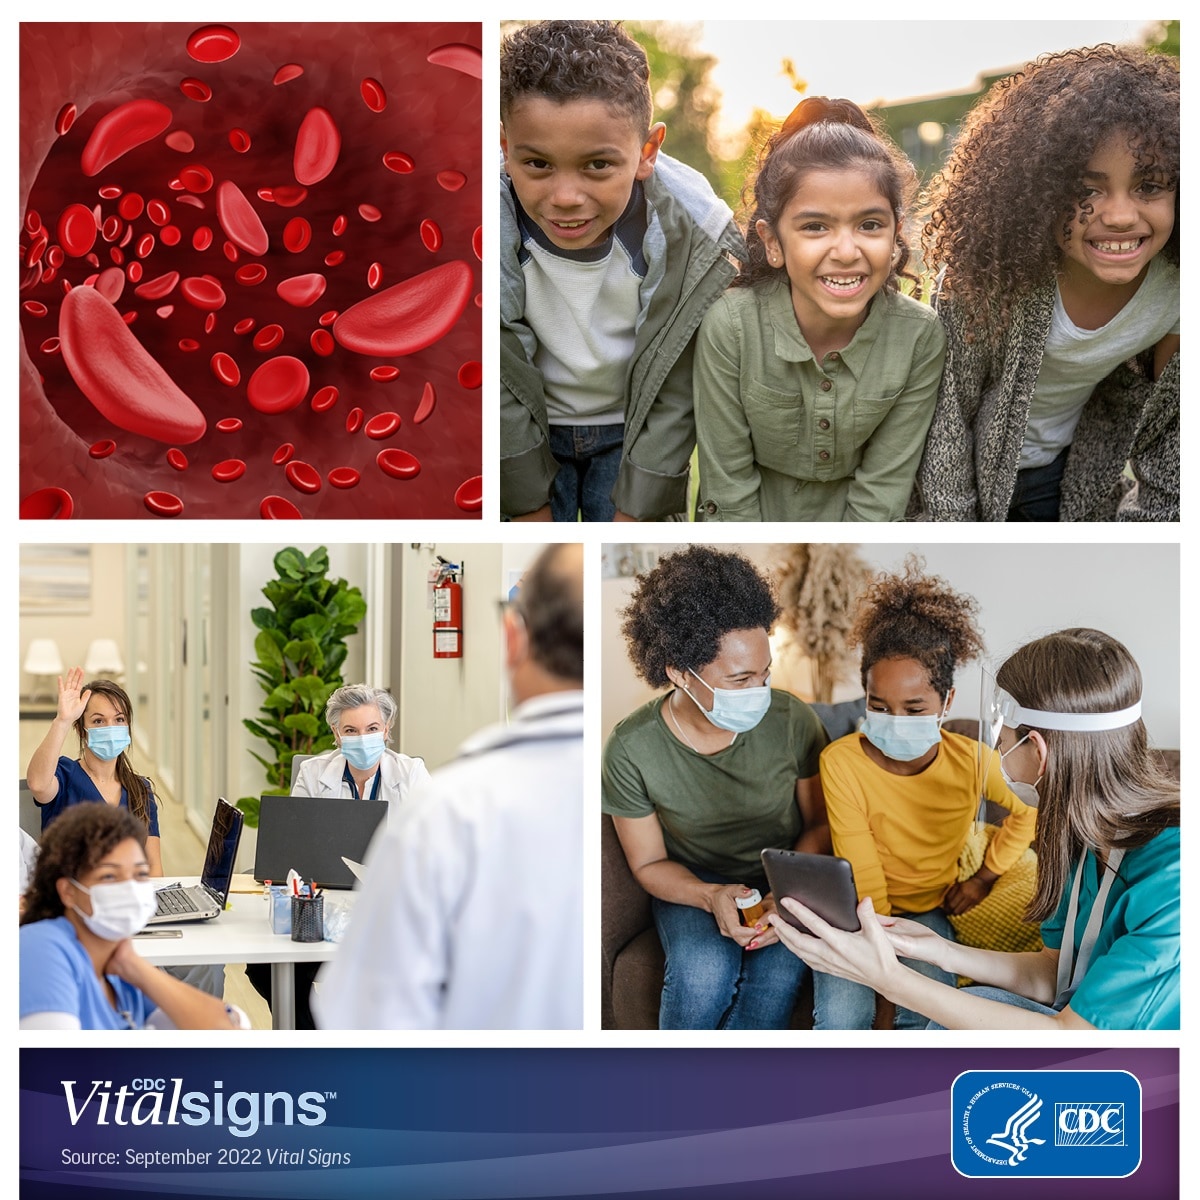 Photo collage showing sickle shaped blood cells, children, health care providers, and a nurse talking with patients.